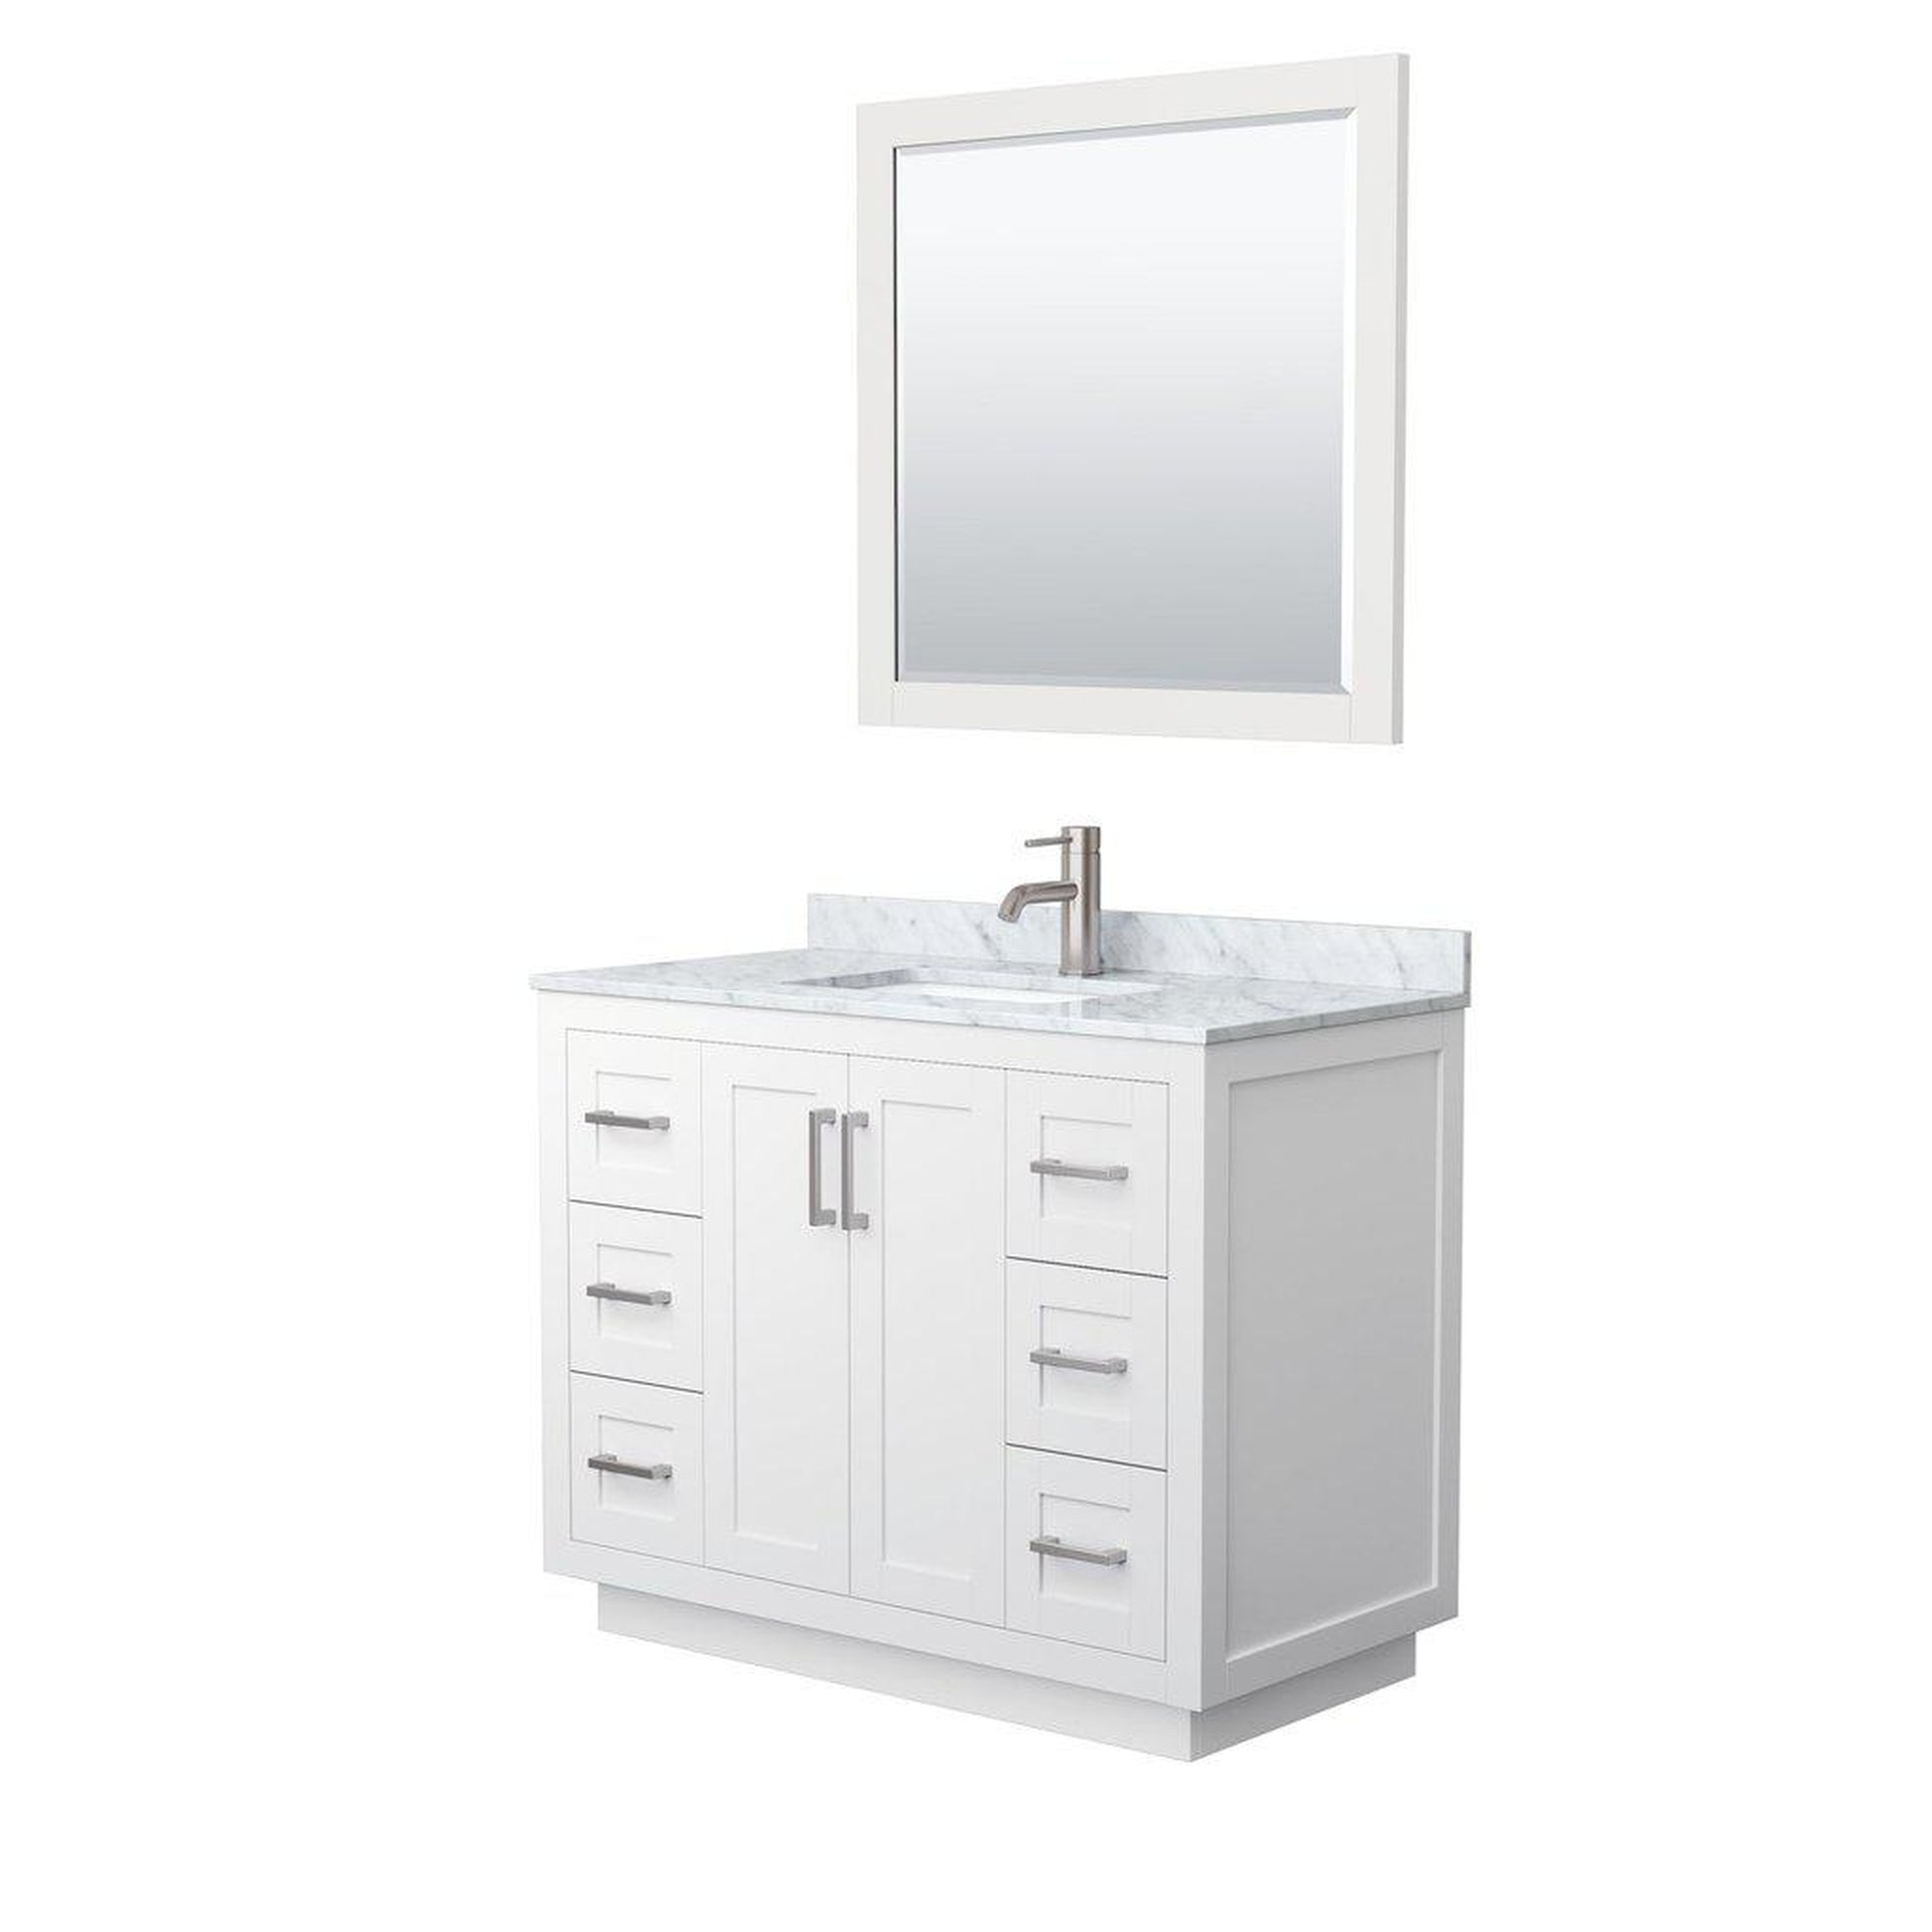 Wyndham Collection Miranda 42" Single Bathroom White Vanity Set With White Carrara Marble Countertop, Undermount Square Sink, 34" Mirror And Brushed Nickel Trim